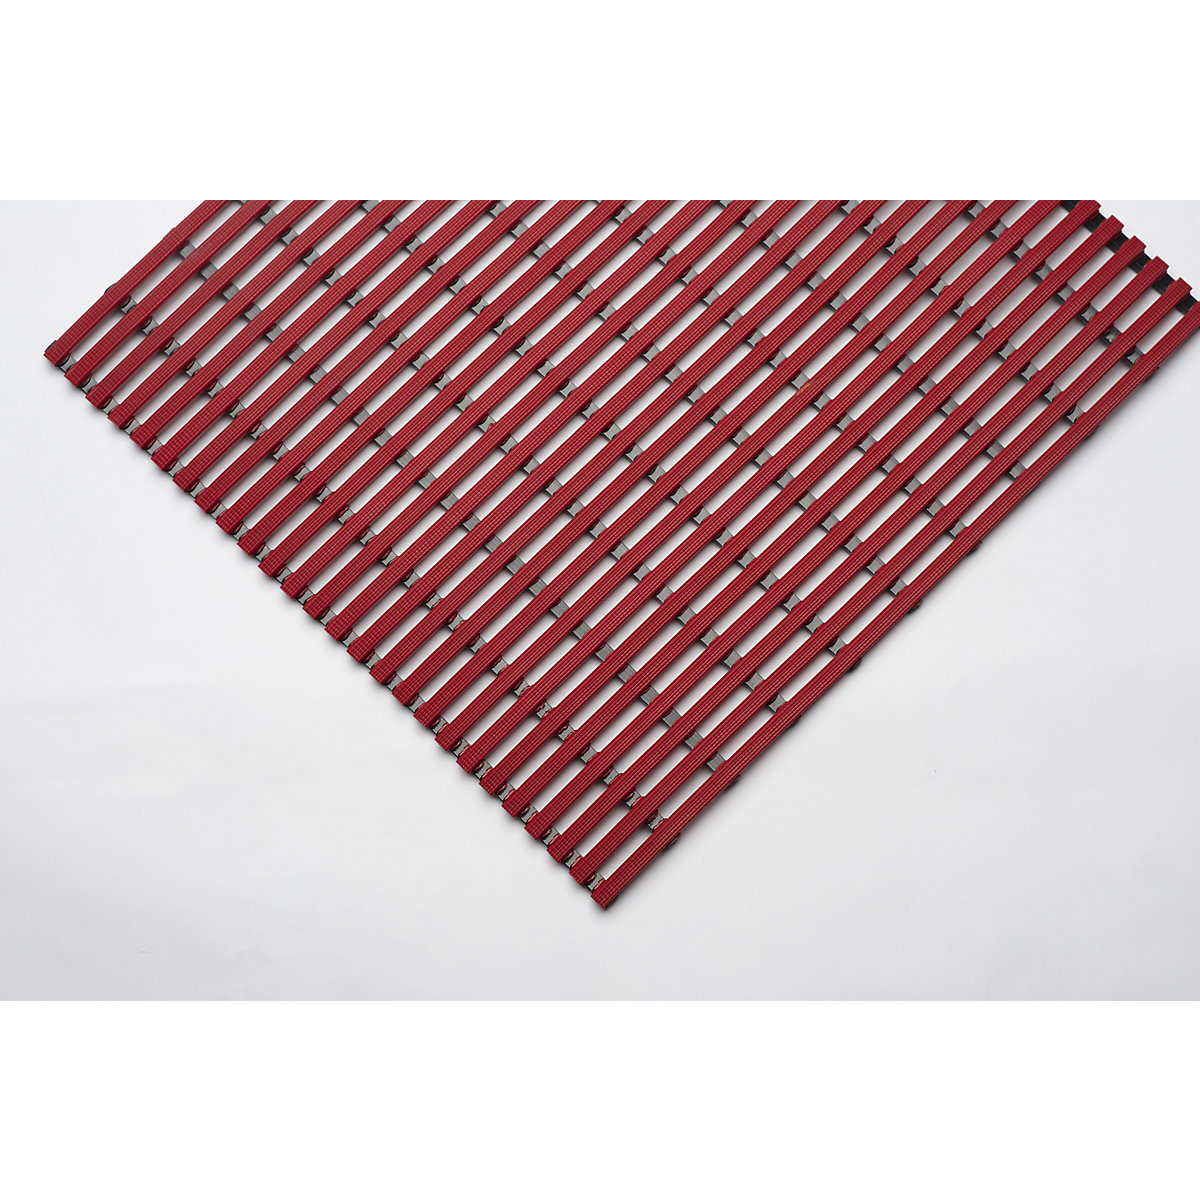 Floor mat for showers and changing rooms (Product illustration 25)-24